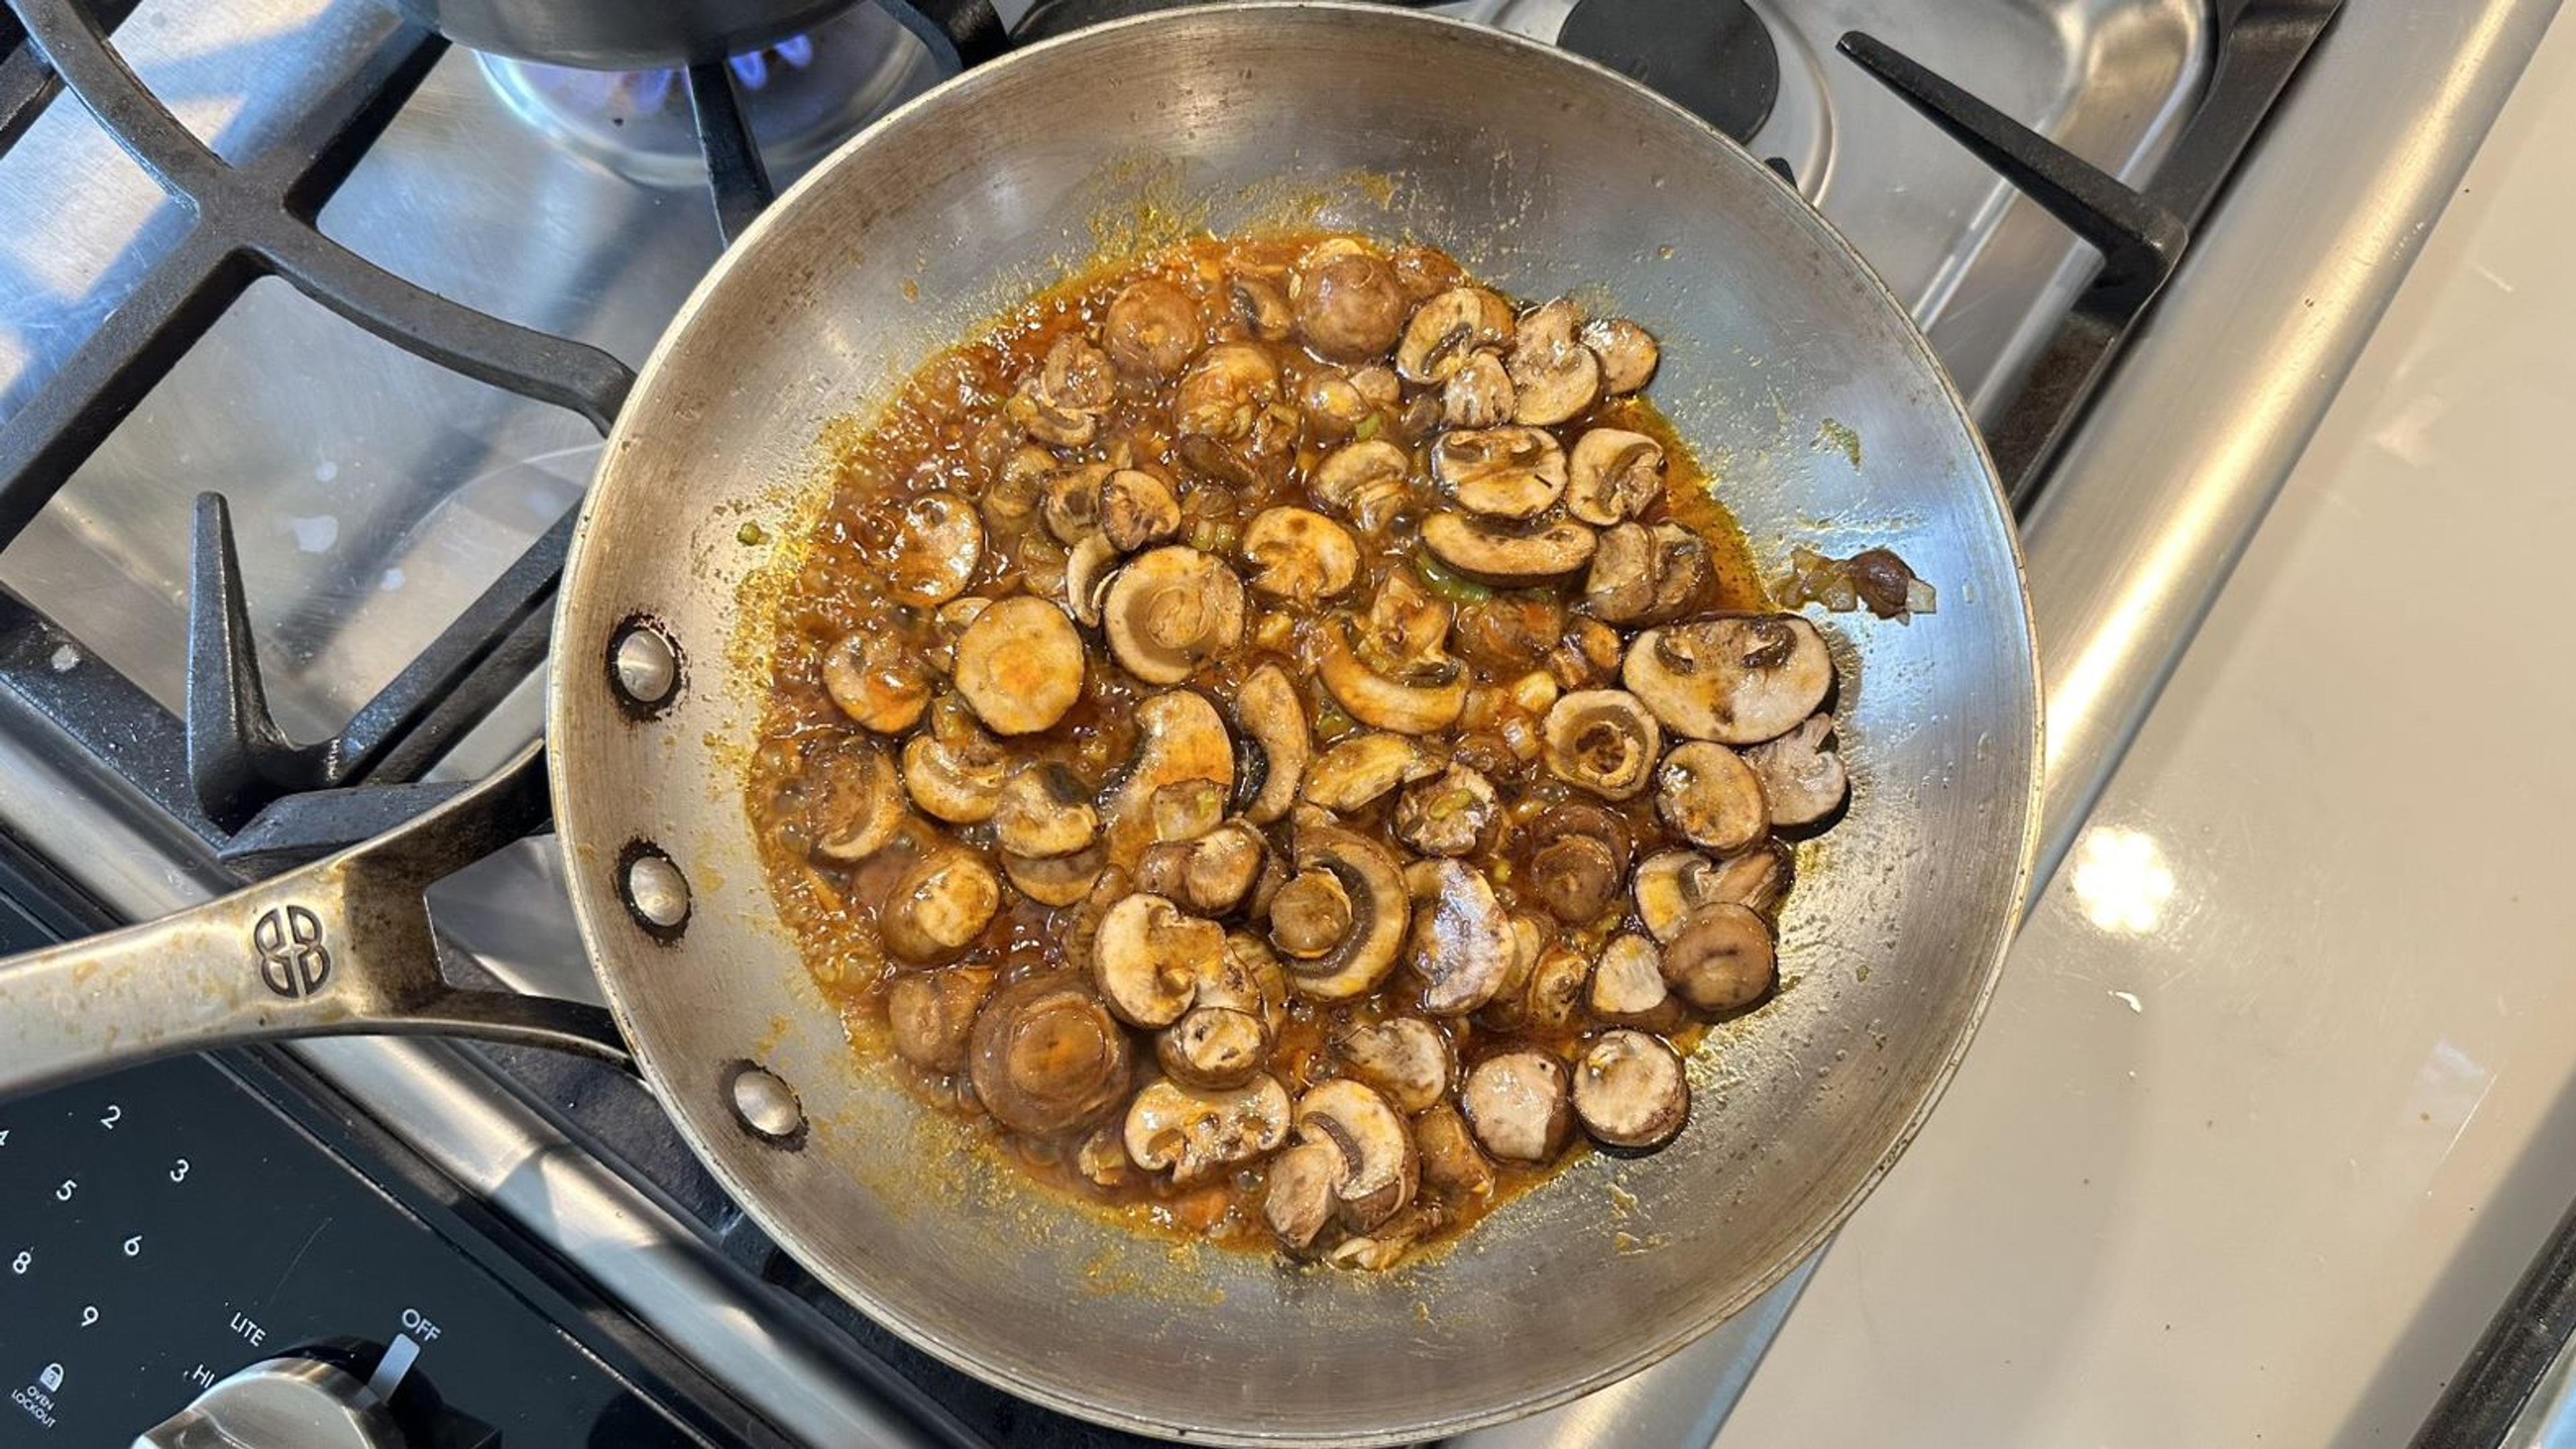 Add gochujang paste and mix in. Allow to sear for 2 minutes. Add honey and stir, then add mushrooms and turn temperature up to medium. Coat the mushrooms in the sauce and allow to cook until softened, about 5-7 minutes, stirring occasionally.